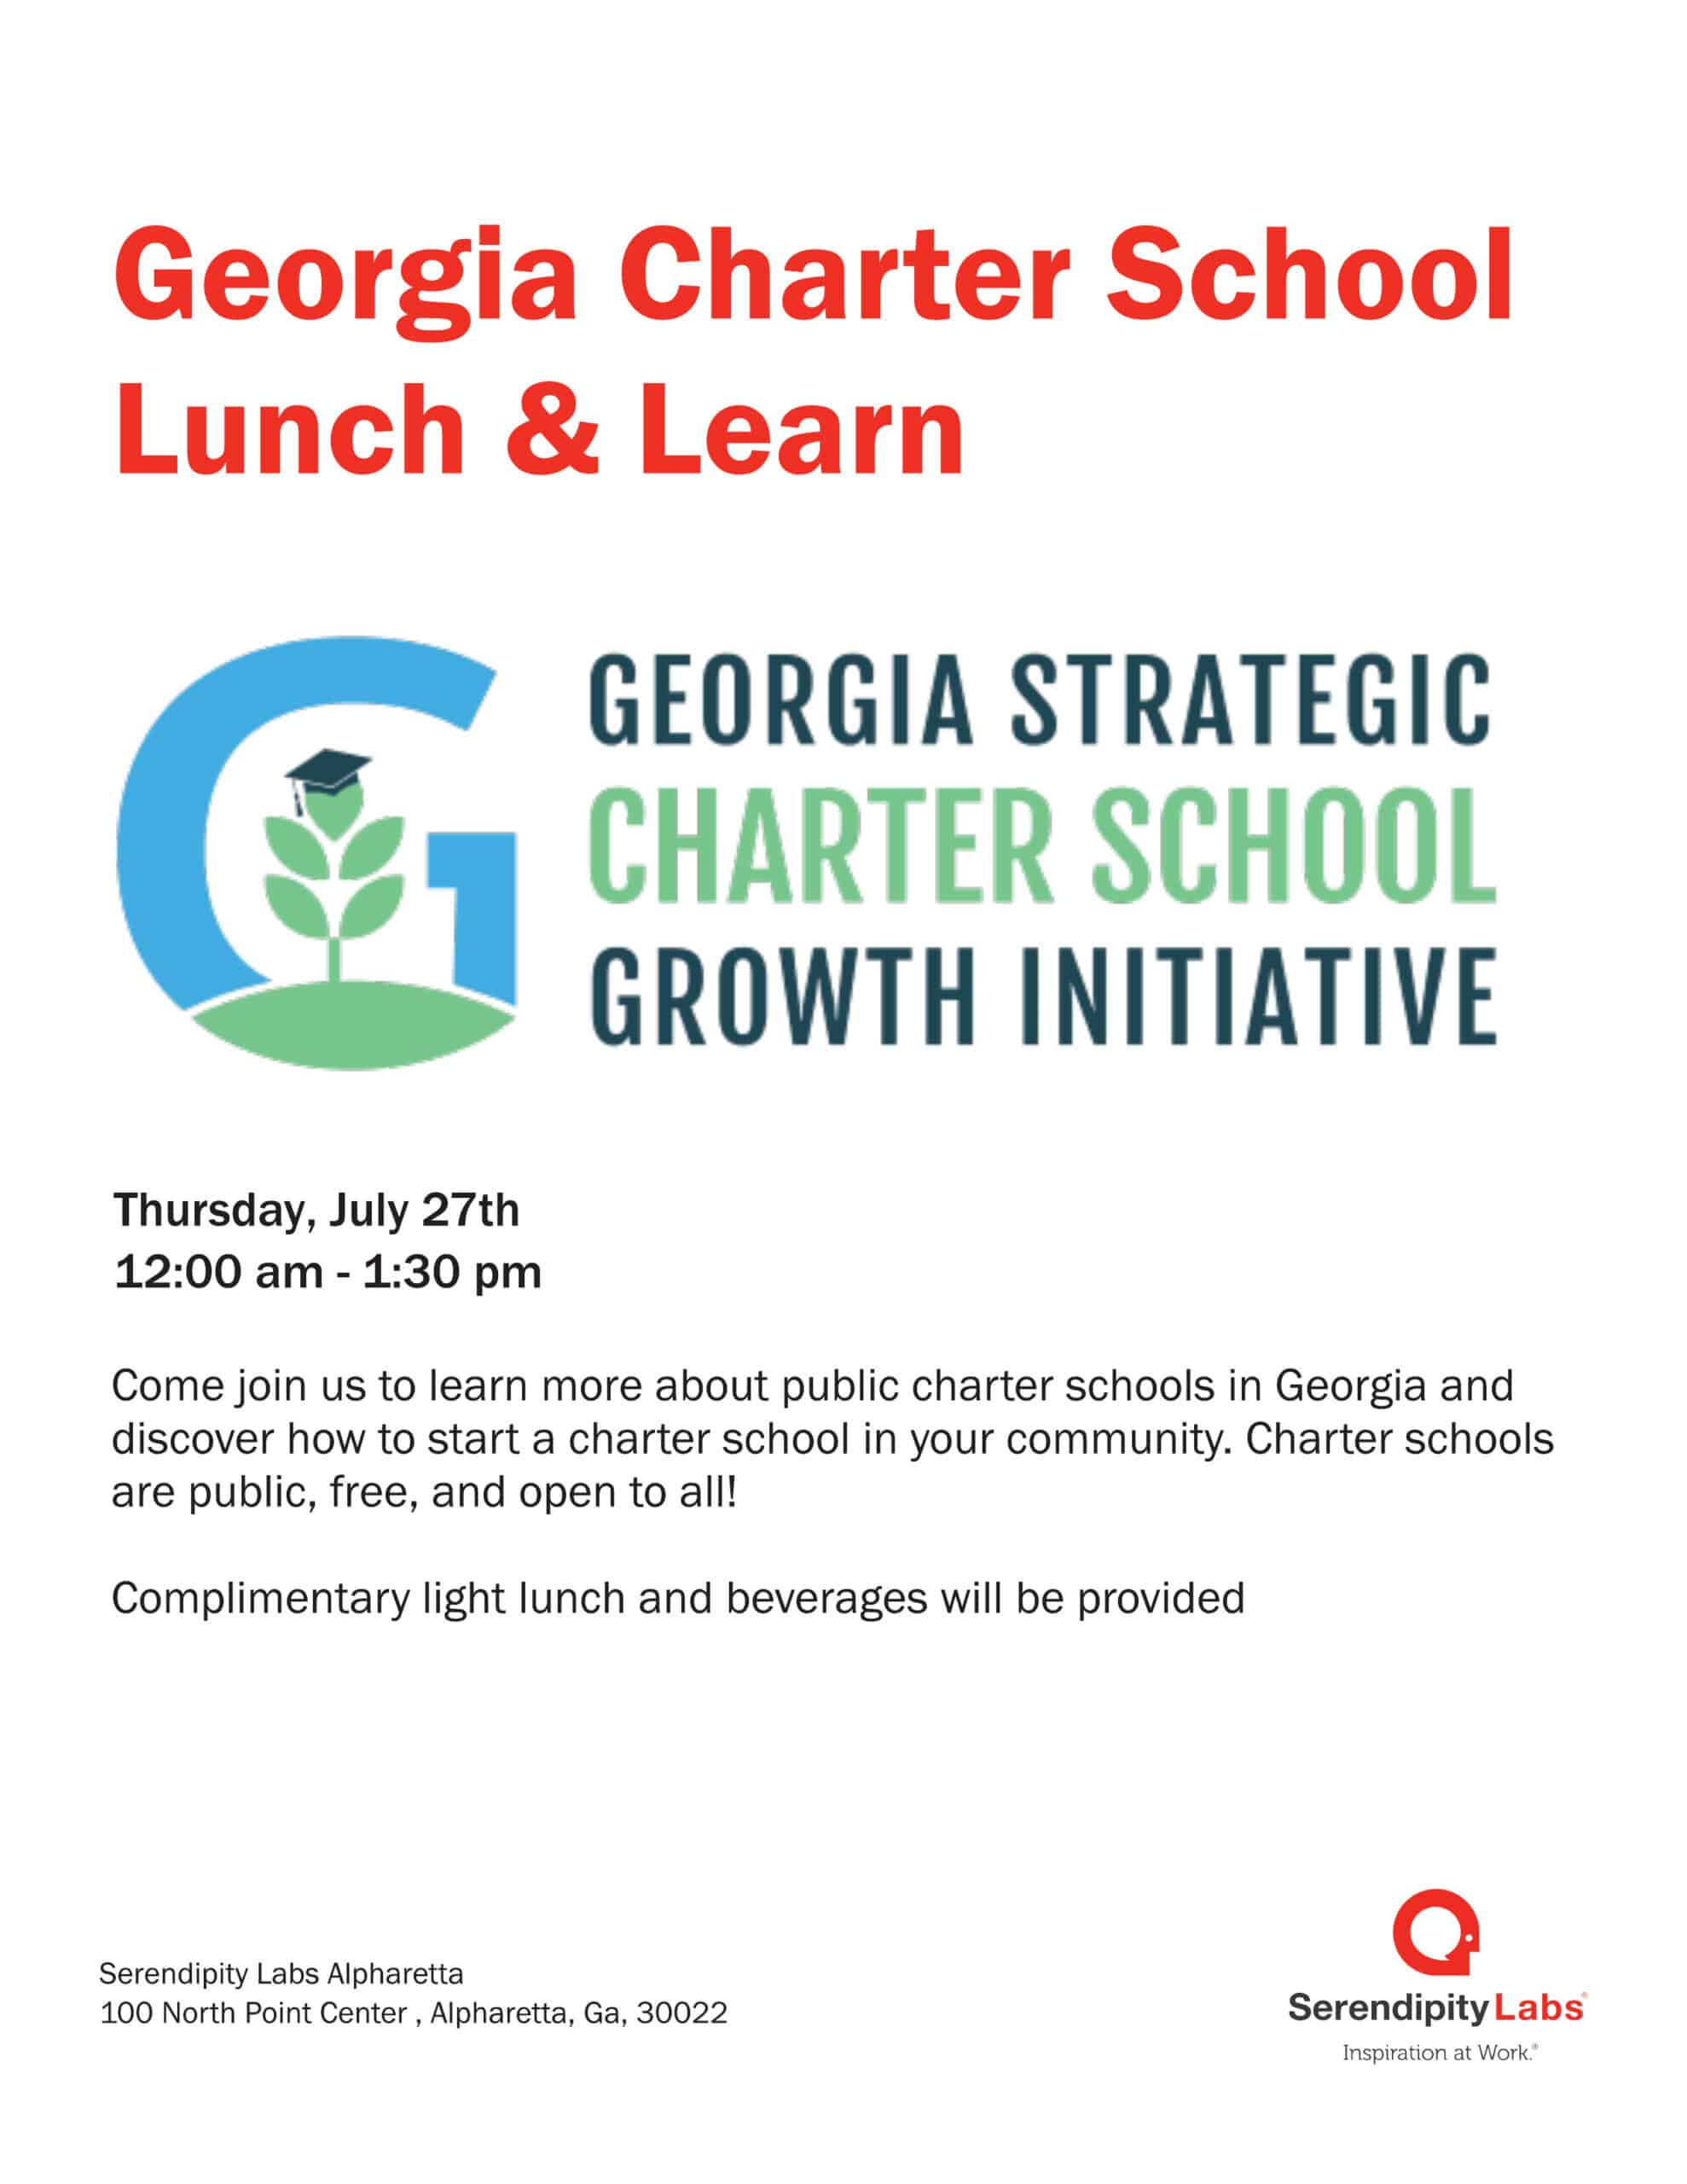 Georgia Charter Schools Lunch and Learn